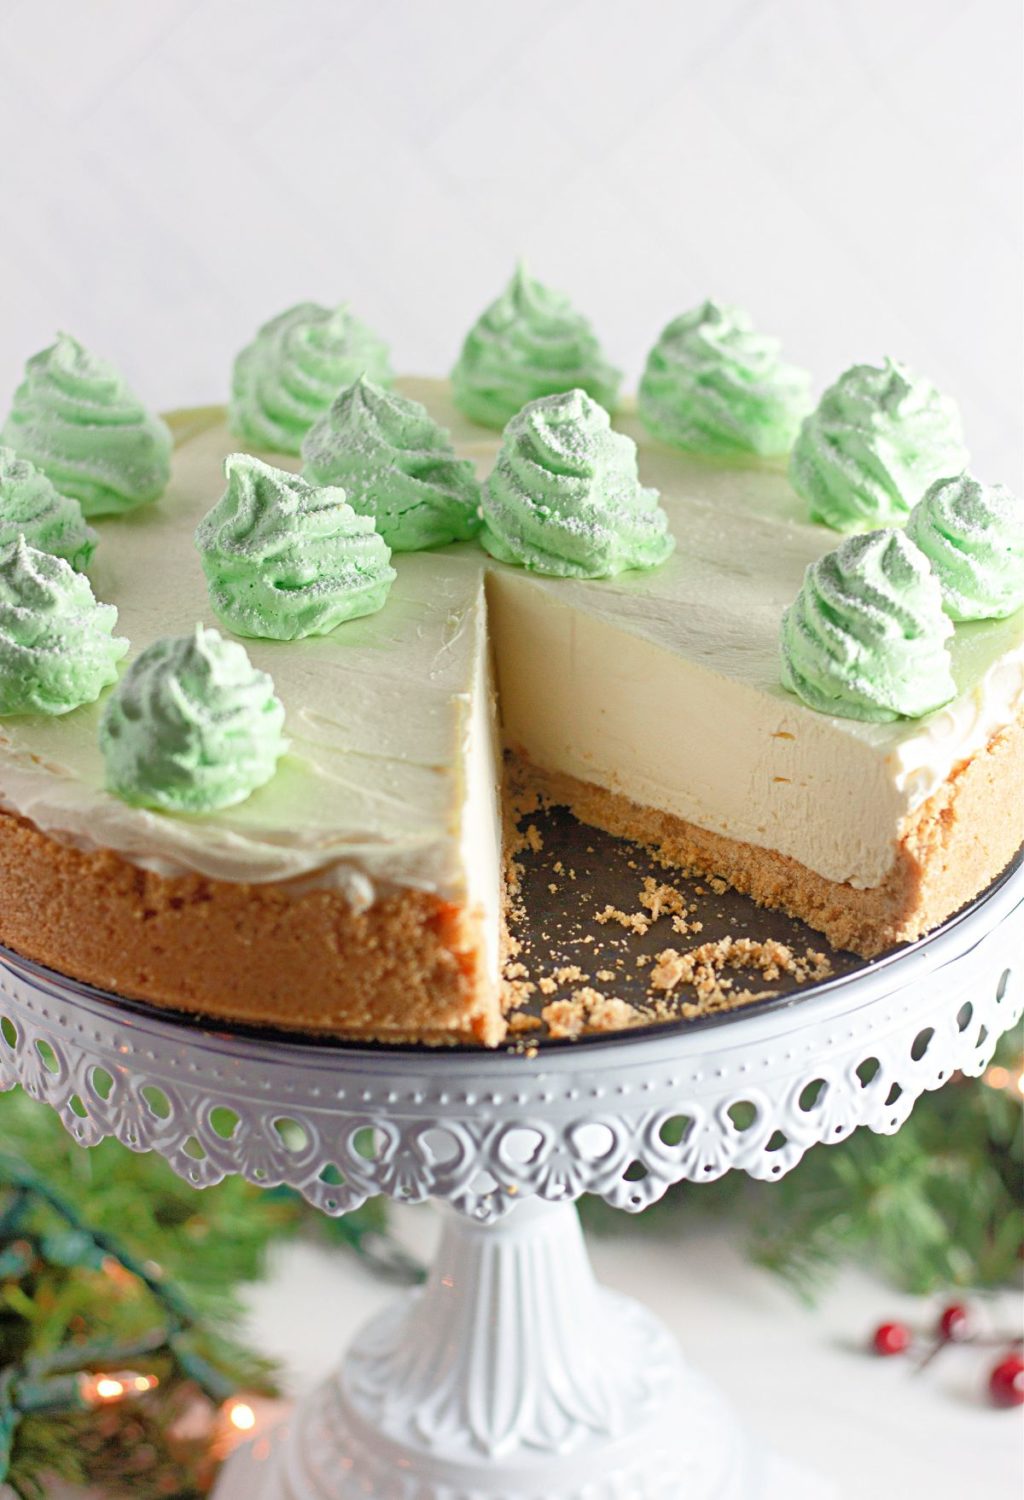 A green cheesecake with a slice taken out.